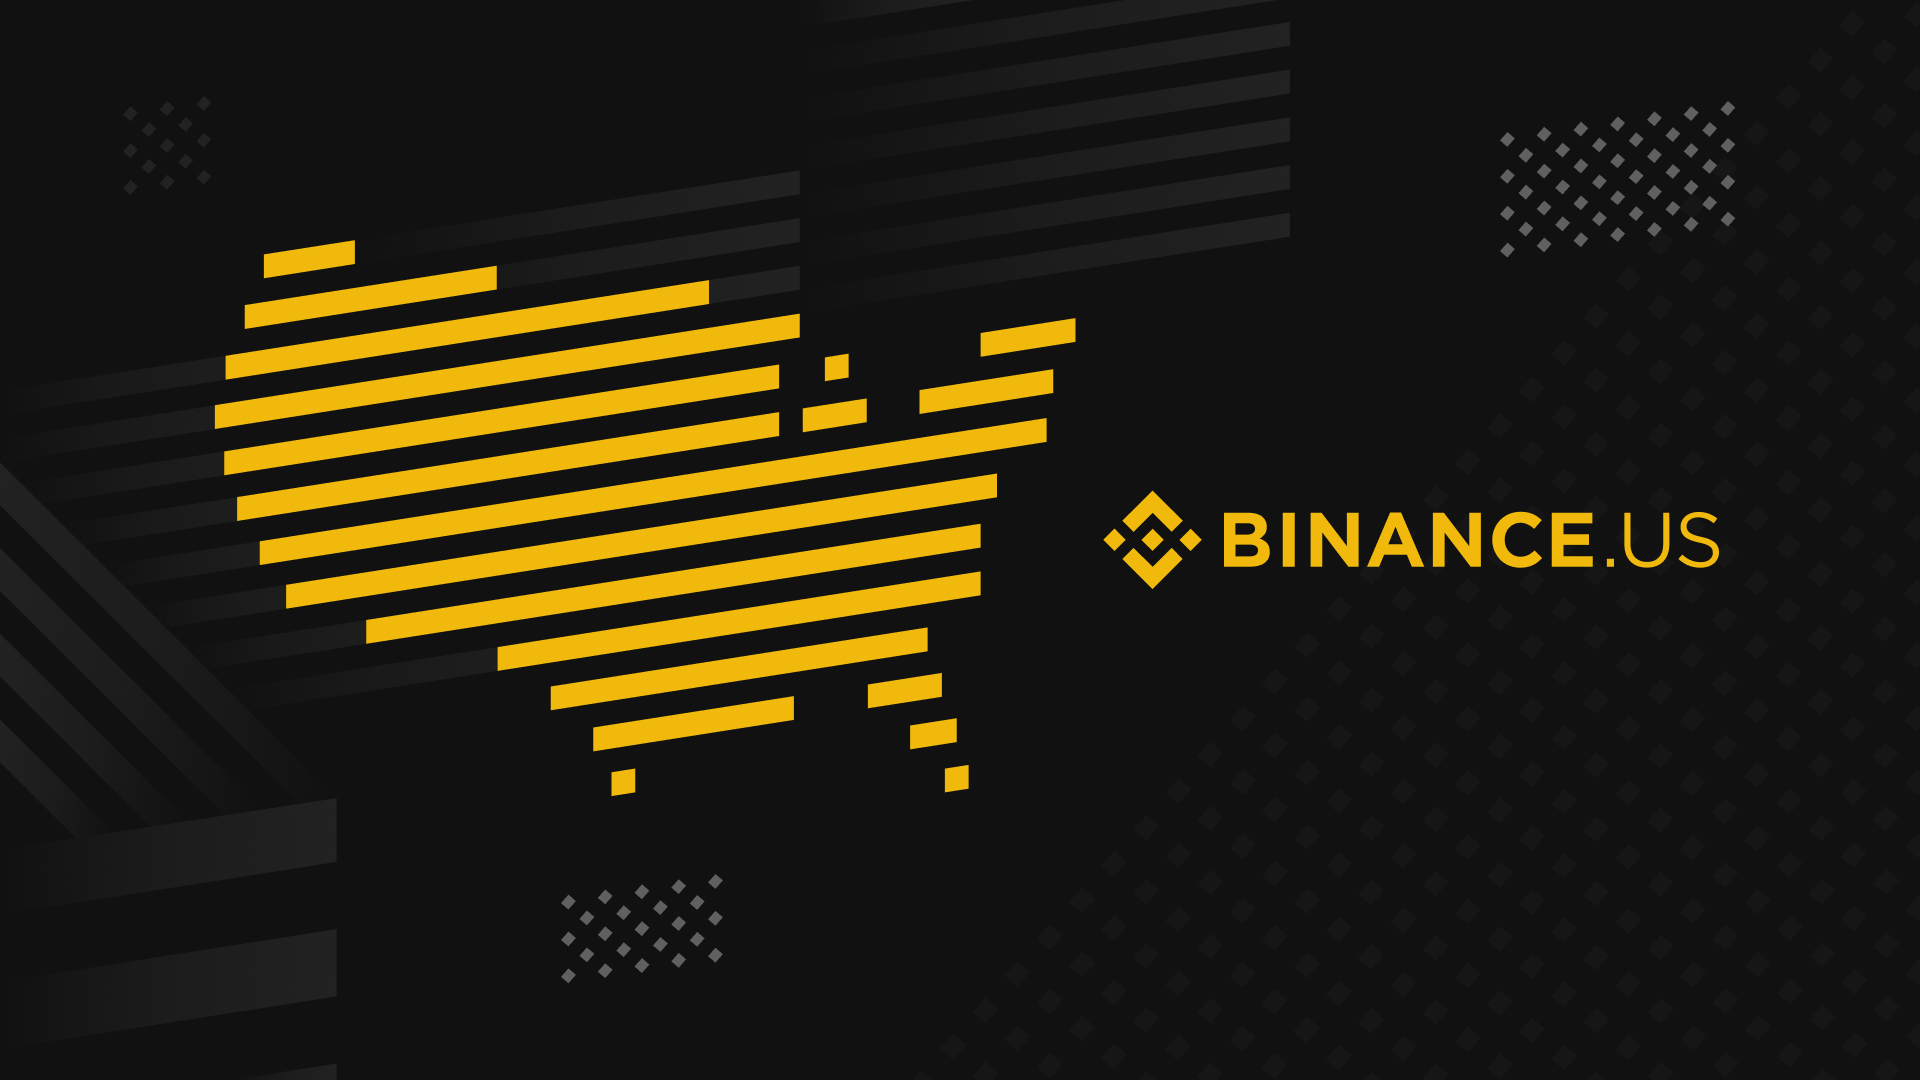 can i use binance.com in the us